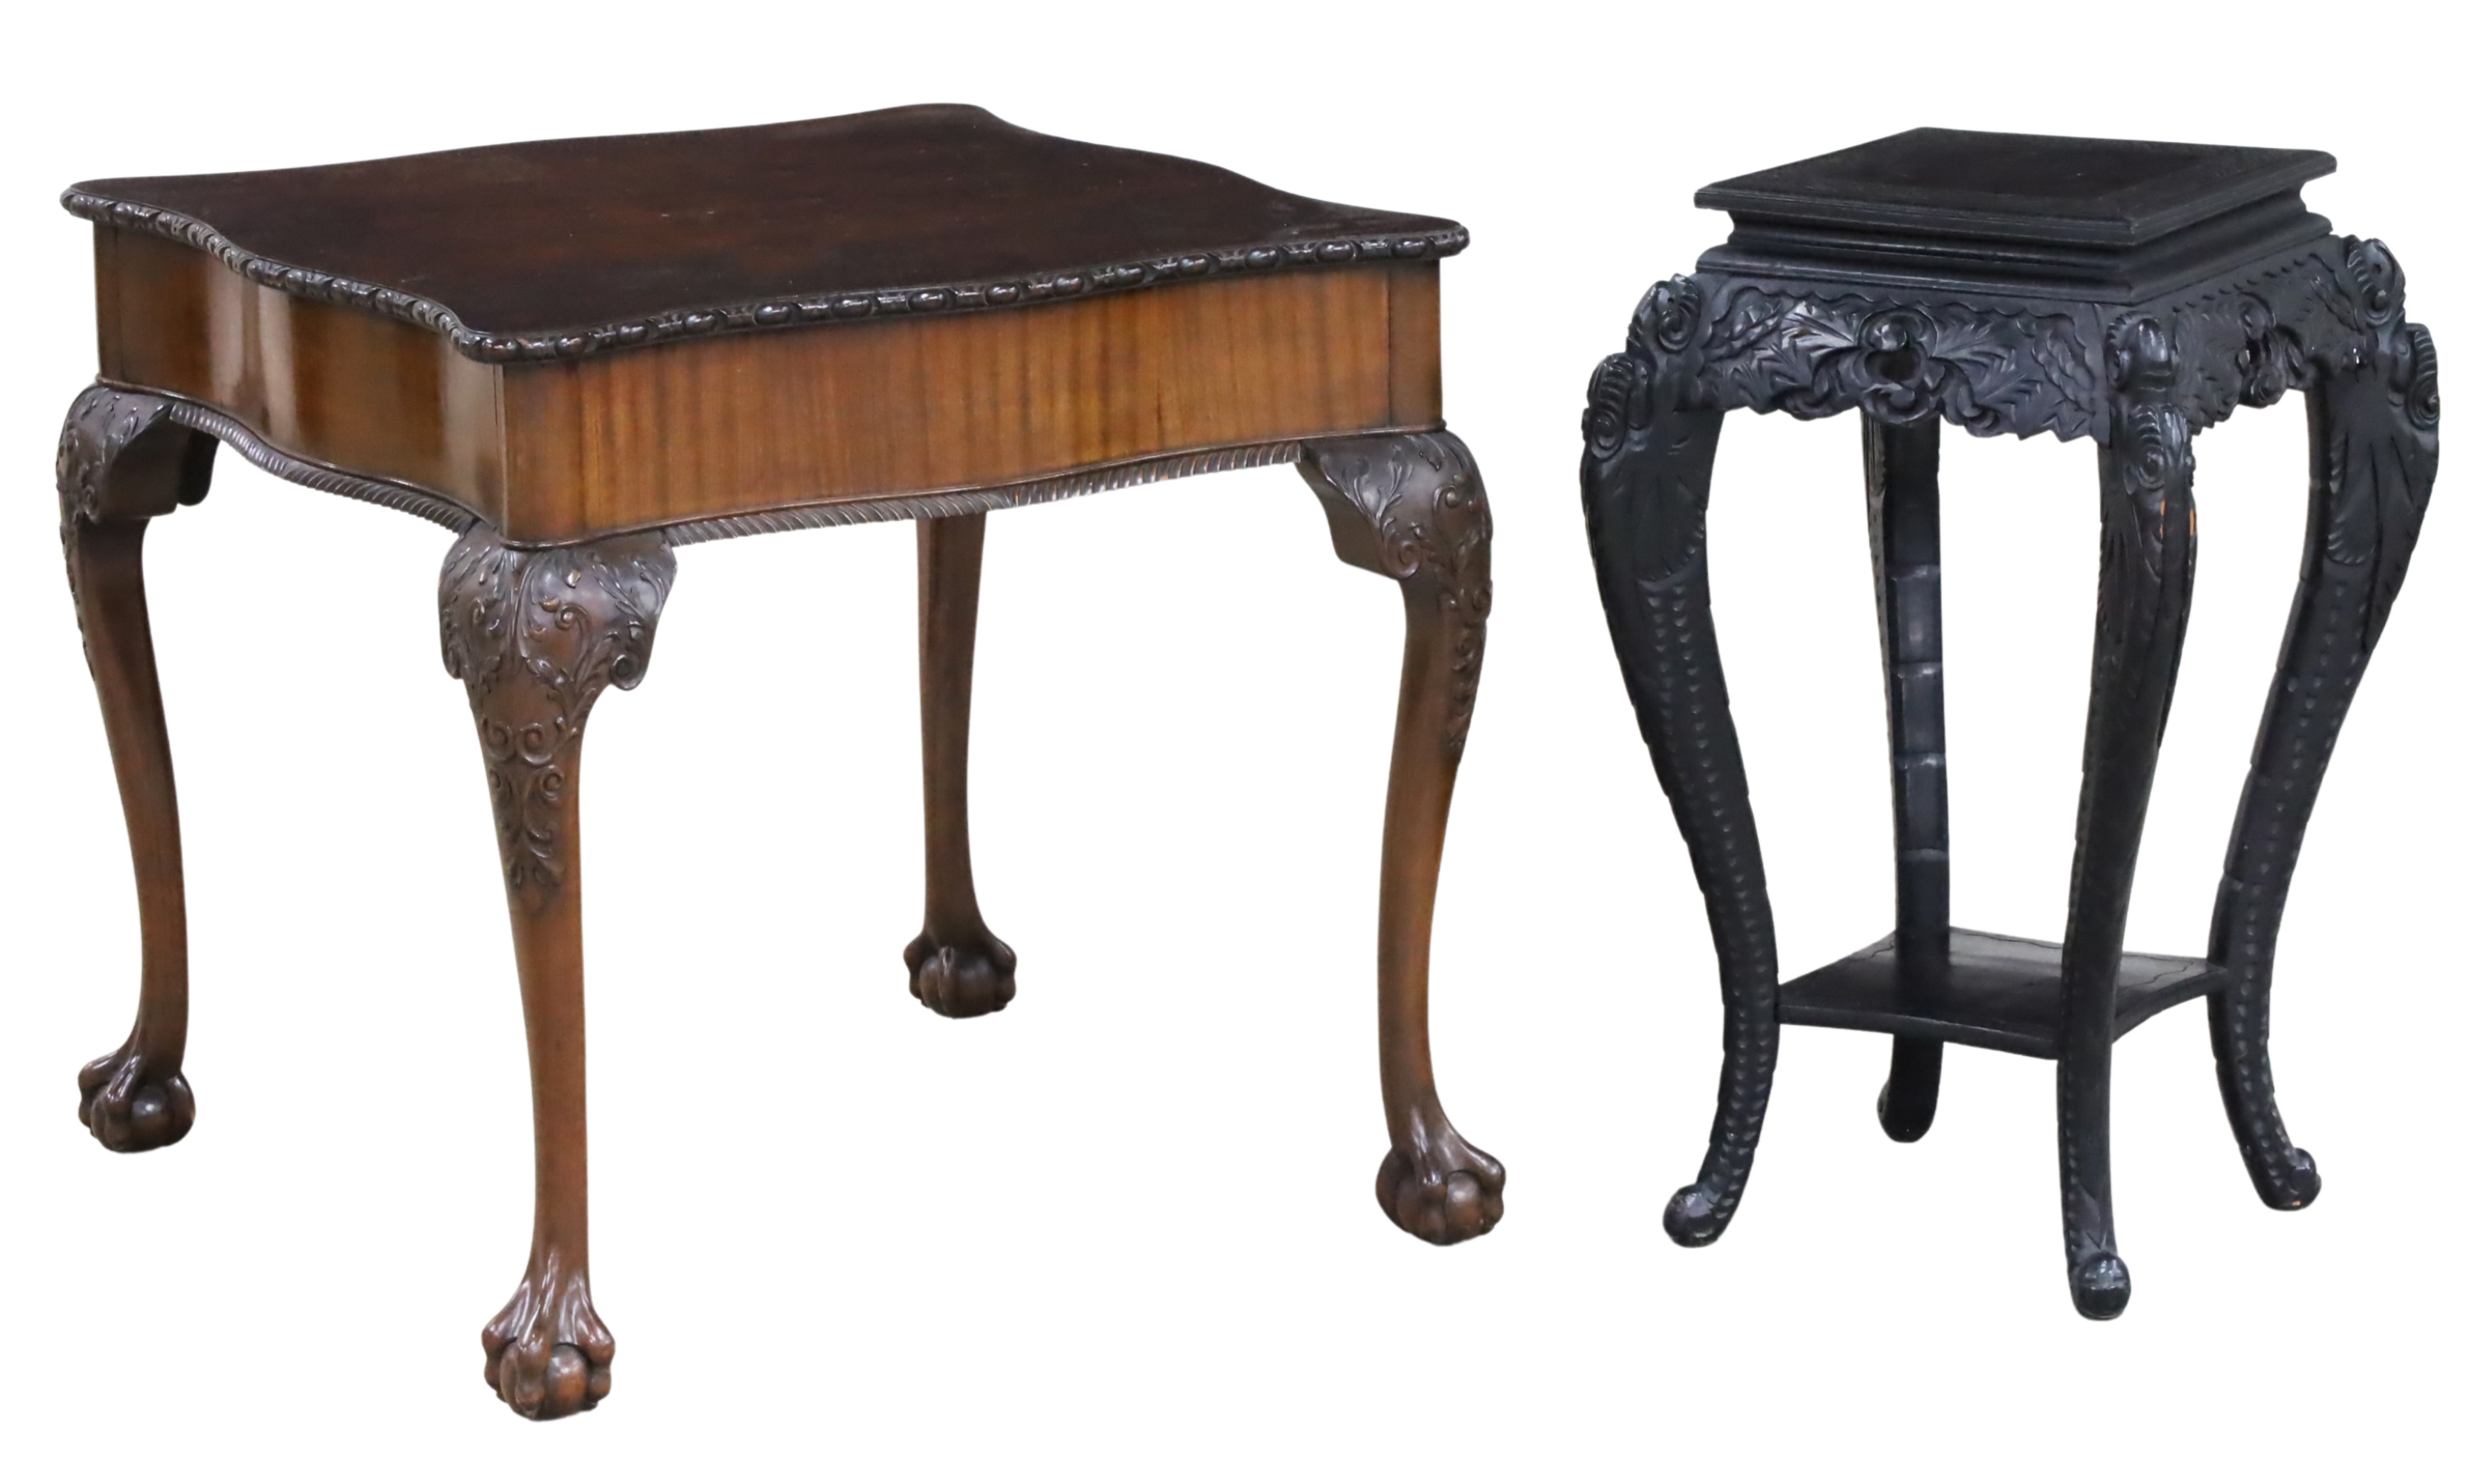 CHIPPENDALE STYLE TABLE & EBONY